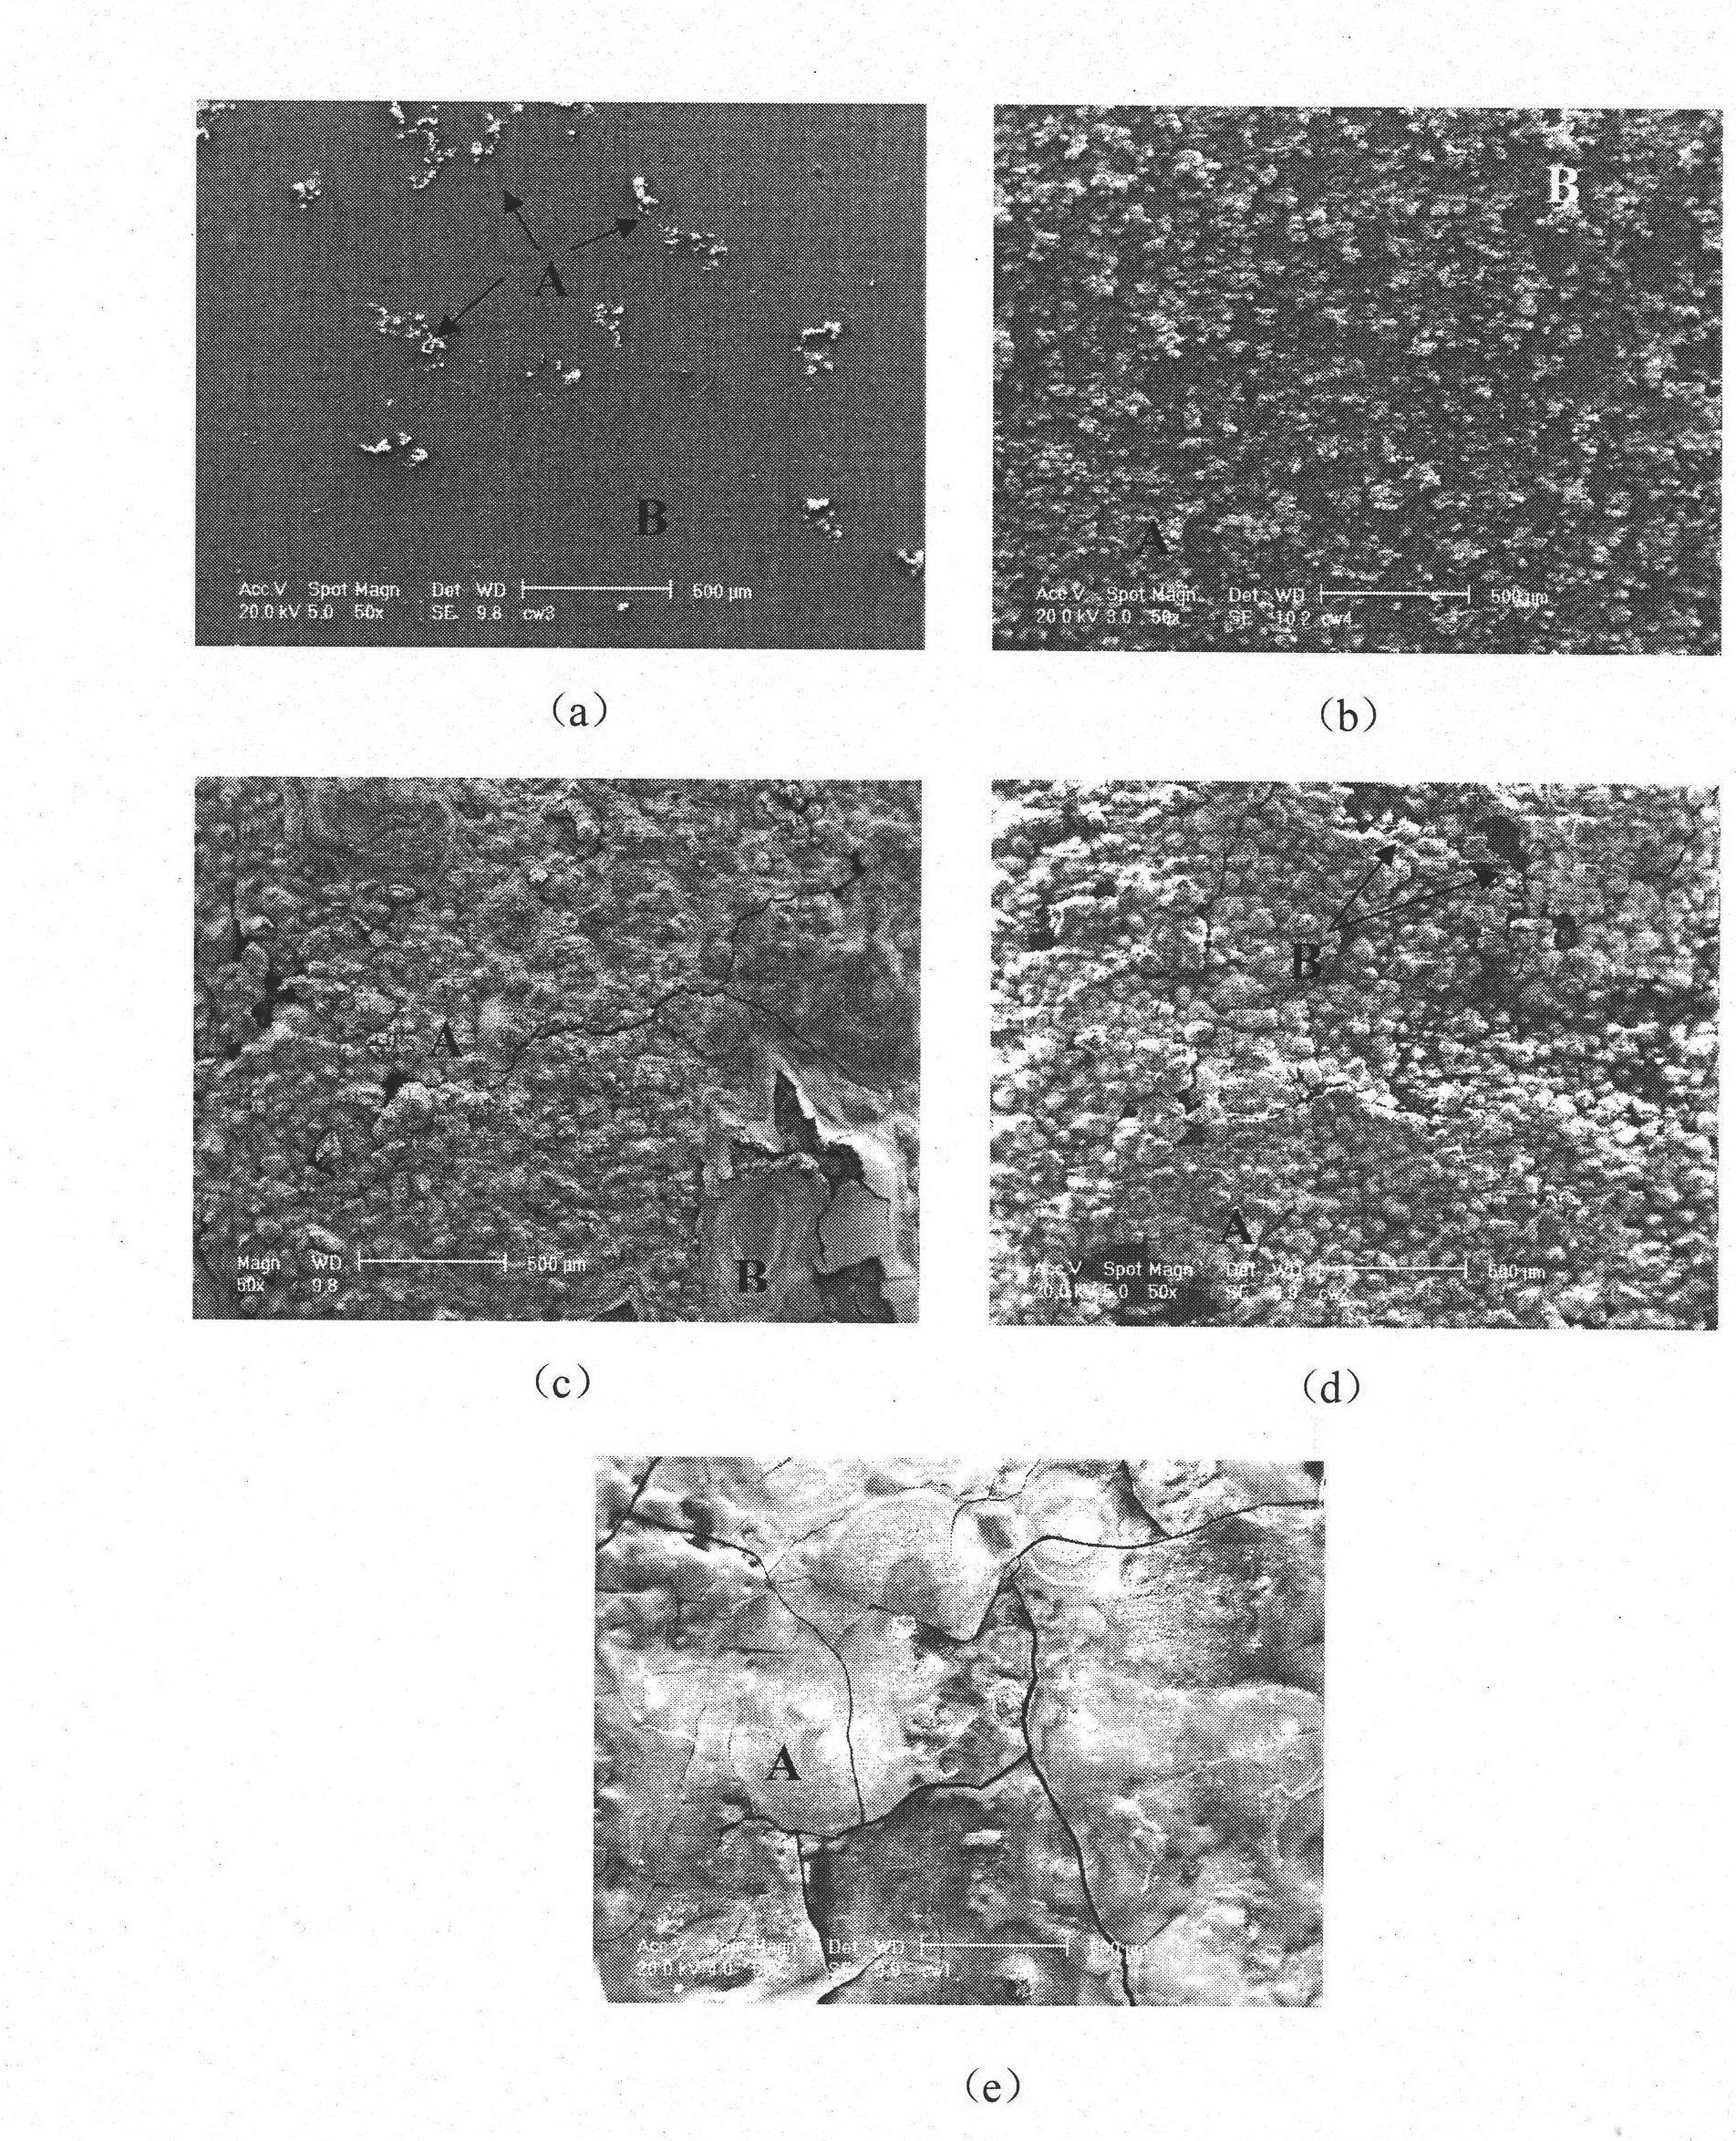 Accelerated testing apparatus for simulation of corrosion by industrially polluted atmosphere